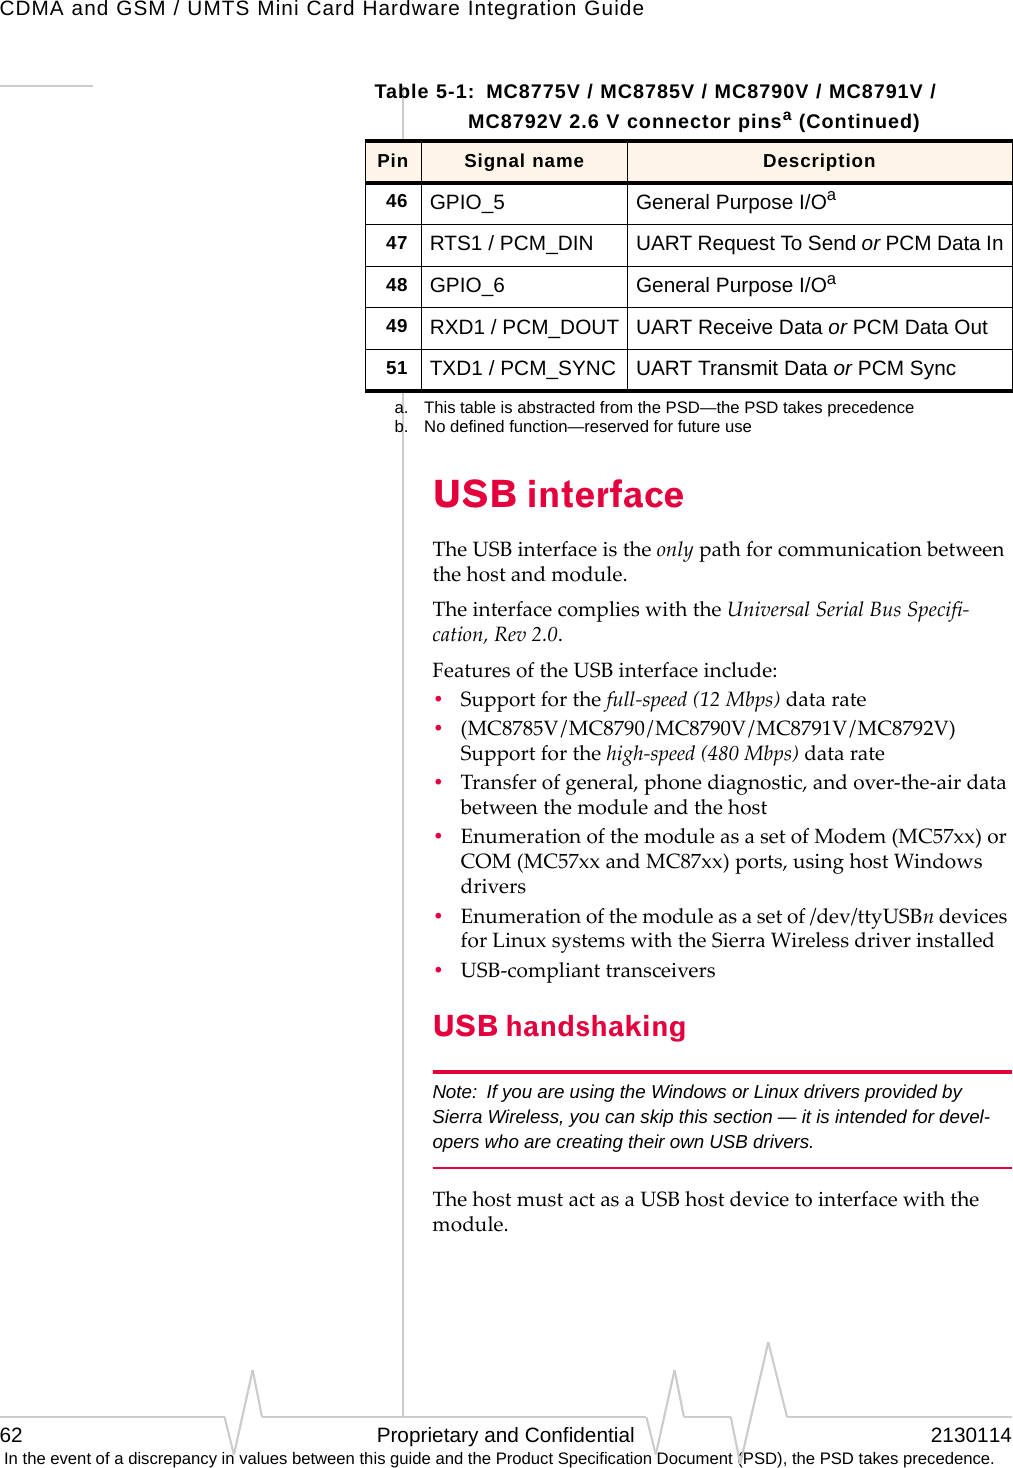 CDMA and GSM / UMTS Mini Card Hardware Integration Guide62 Proprietary and Confidential 2130114 In the event of a discrepancy in values between this guide and the Product Specification Document (PSD), the PSD takes precedence.USB interfaceTheUSBinterfaceistheonlypathforcommunicationbetweenthehostandmodule.TheinterfacecomplieswiththeUniversalSerialBusSpecifi‐cation,Rev2.0.FeaturesoftheUSBinterfaceinclude:•Supportforthefull‐speed(12Mbps)datarate•(MC8785V/MC8790/MC8790V/MC8791V/MC8792V)Supportforthehigh‐speed(480Mbps)datarate•Transferofgeneral,phonediagnostic,andover‐the‐airdatabetweenthemoduleandthehost•EnumerationofthemoduleasasetofModem(MC57xx)orCOM(MC57xxandMC87xx)ports,usinghostWindowsdrivers•Enumerationofthemoduleasasetof/dev/ttyUSBndevicesforLinuxsystemswiththeSierraWirelessdriverinstalled•USB‐complianttransceiversUSB handshakingNote: If you are using the Windows or Linux drivers provided by Sierra Wireless, you can skip this section — it is intended for devel-opers who are creating their own USB drivers.ThehostmustactasaUSBhostdevicetointerfacewiththemodule.46 GPIO_5 General Purpose I/Oa47 RTS1 / PCM_DIN UART Request To Send or PCM Data In48 GPIO_6 General Purpose I/Oa49 RXD1 / PCM_DOUT UART Receive Data or PCM Data Out51 TXD1 / PCM_SYNC UART Transmit Data or PCM Synca. This table is abstracted from the PSD—the PSD takes precedenceb. No defined function—reserved for future useTable 5-1:  MC8775V / MC8785V / MC8790V / MC8791V / MC8792V 2.6 V connector pinsa (Continued)Pin Signal name Description